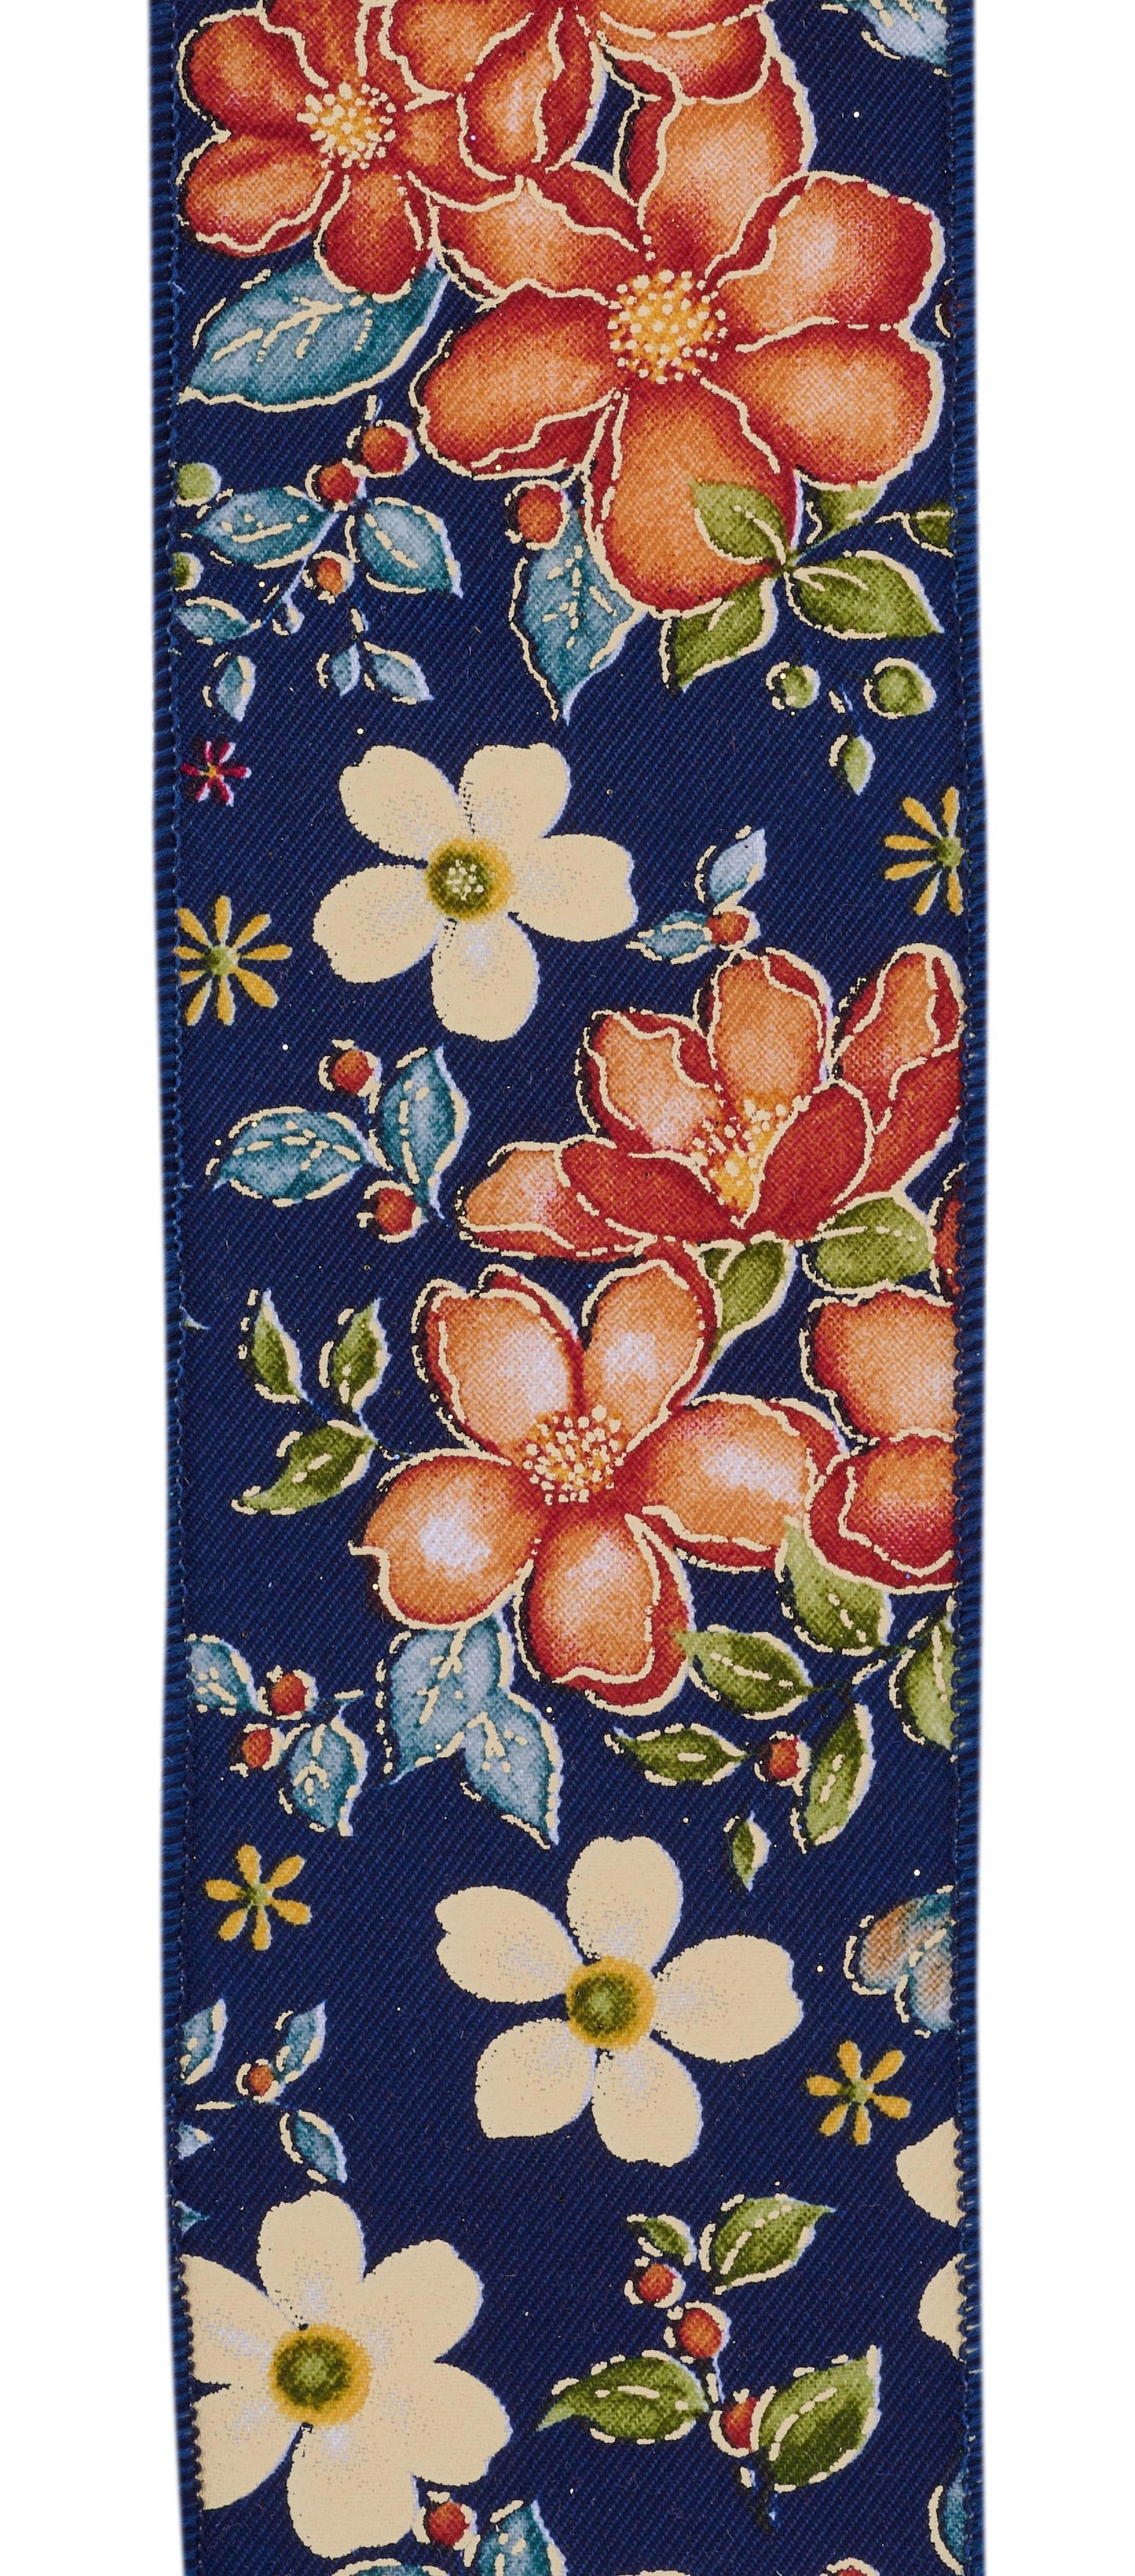 Wired Ribbon * Watercolor Flowers * Navy, Wine, Orange, Moss * 2.5" x 10 Yards Canvas * RGF115719